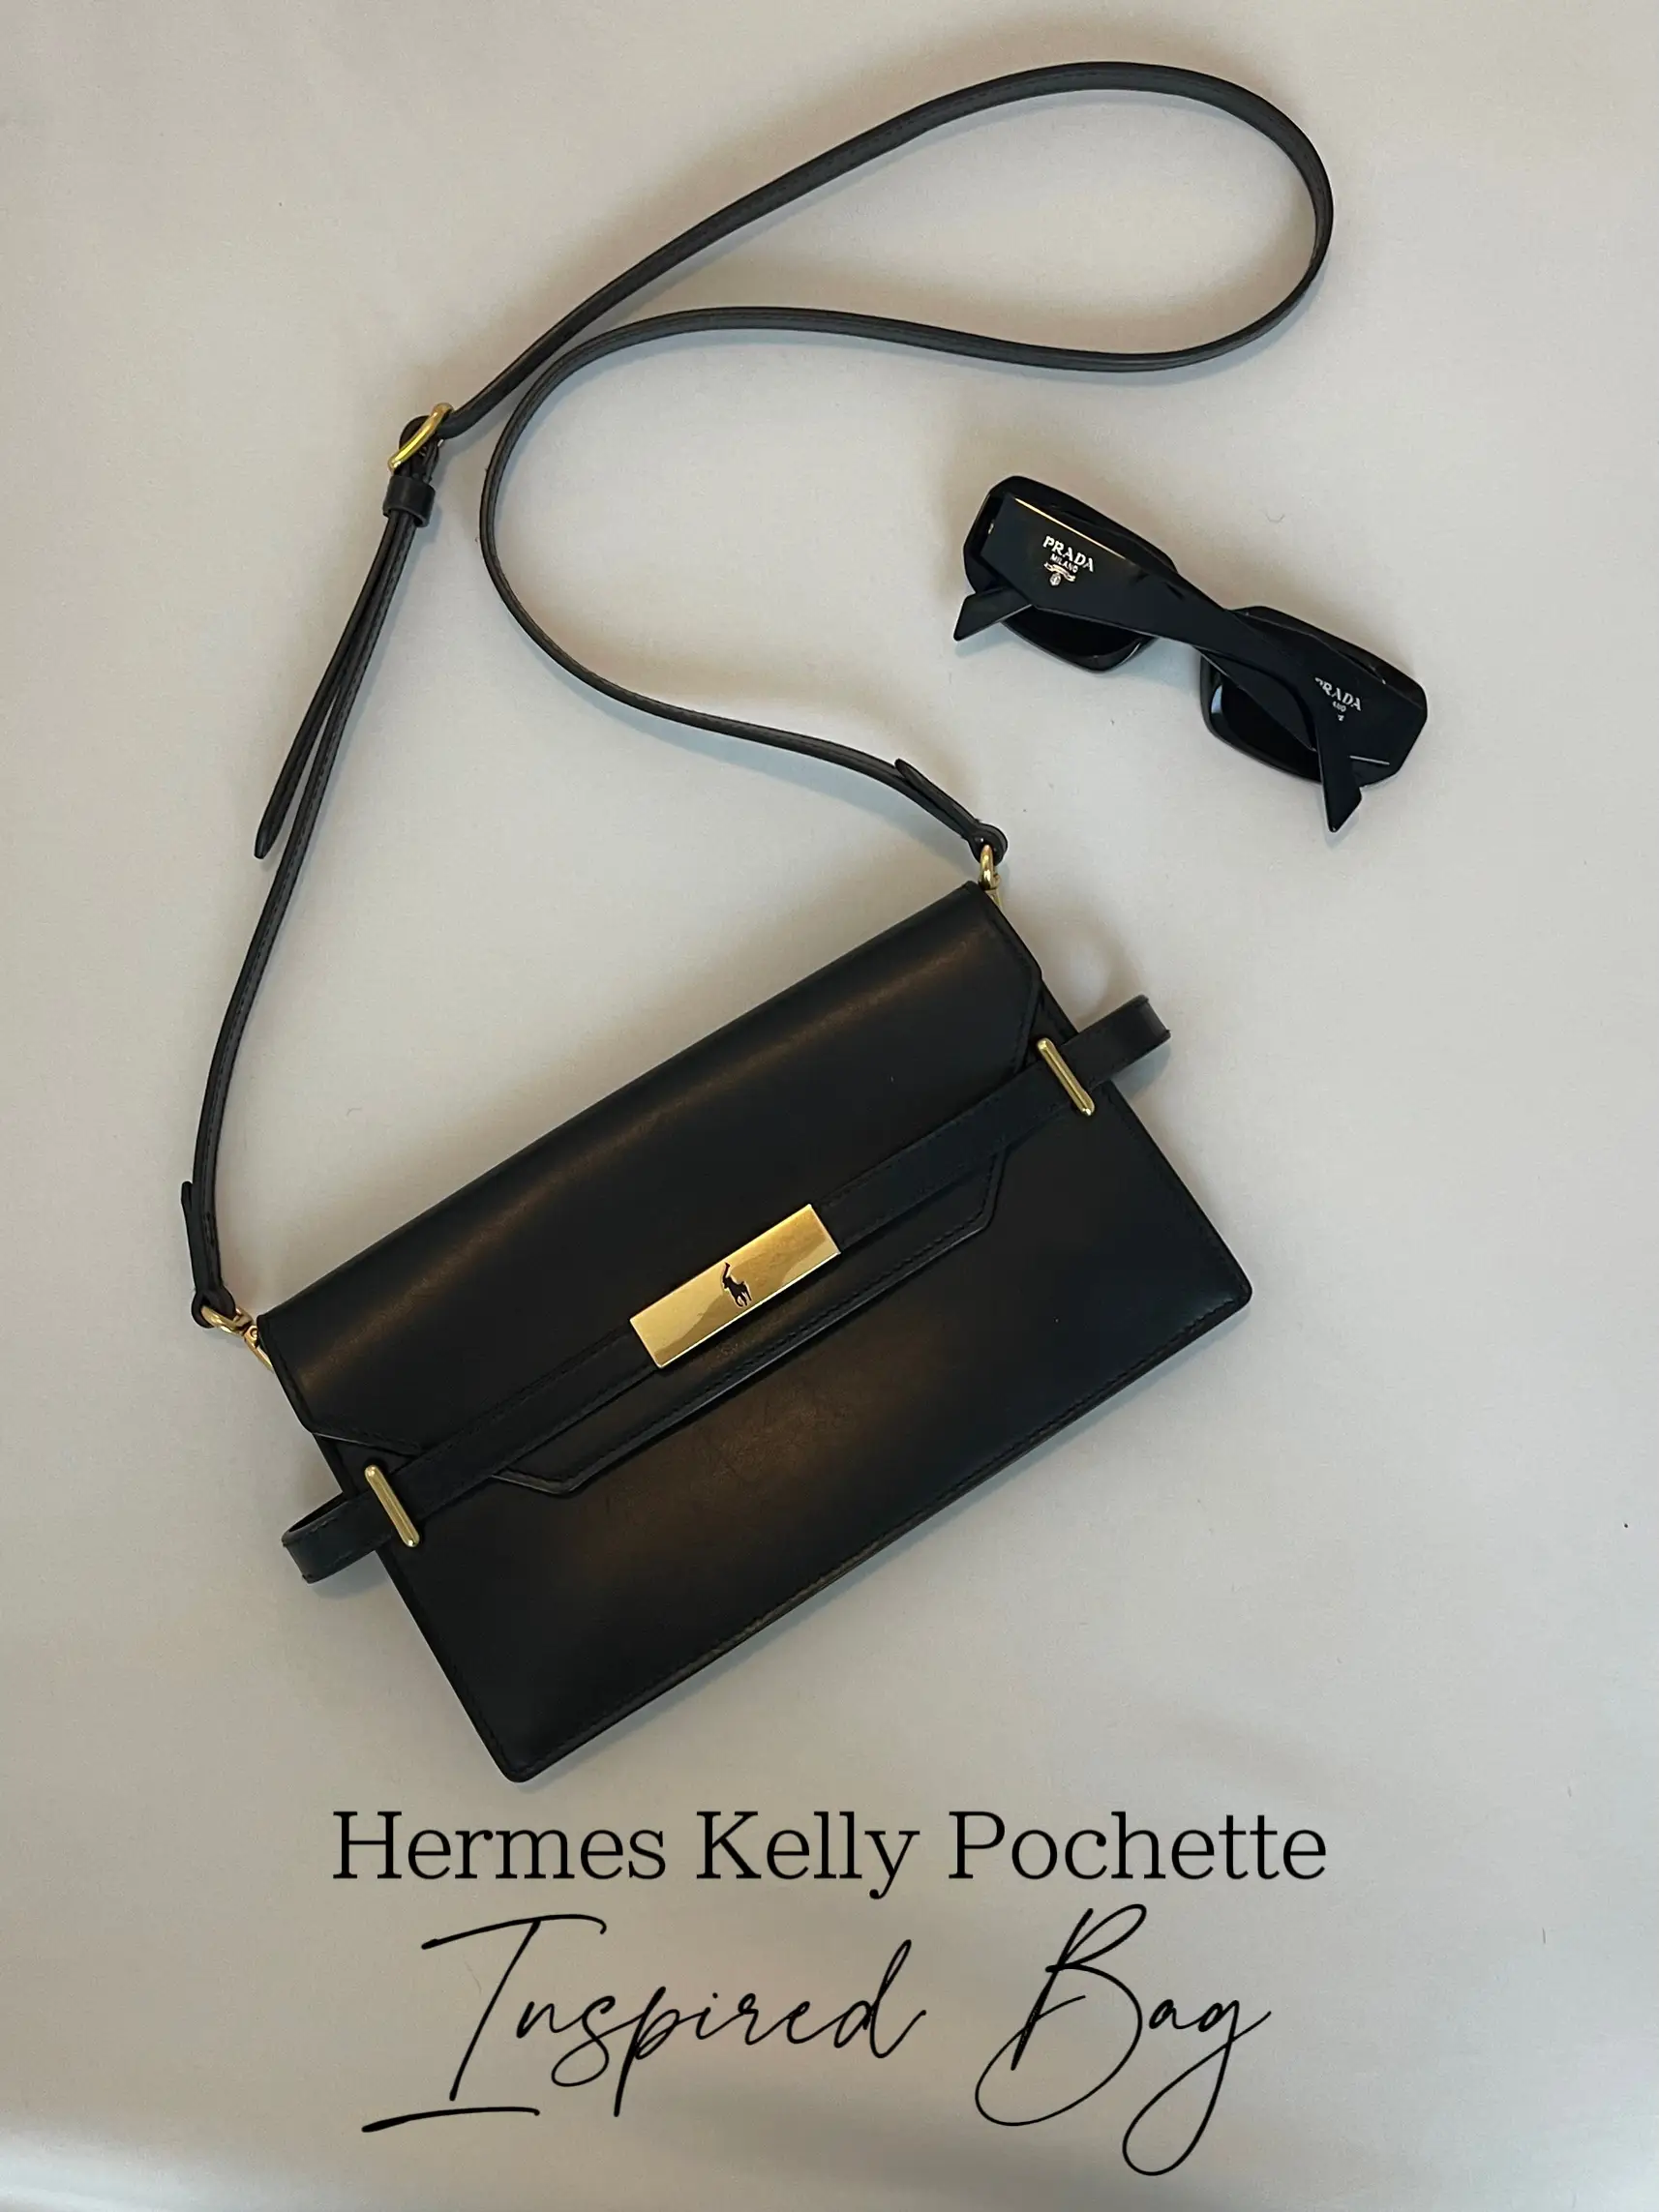 Five fabulous ways to wear the #hermes Kelly Danse! Which is your favo